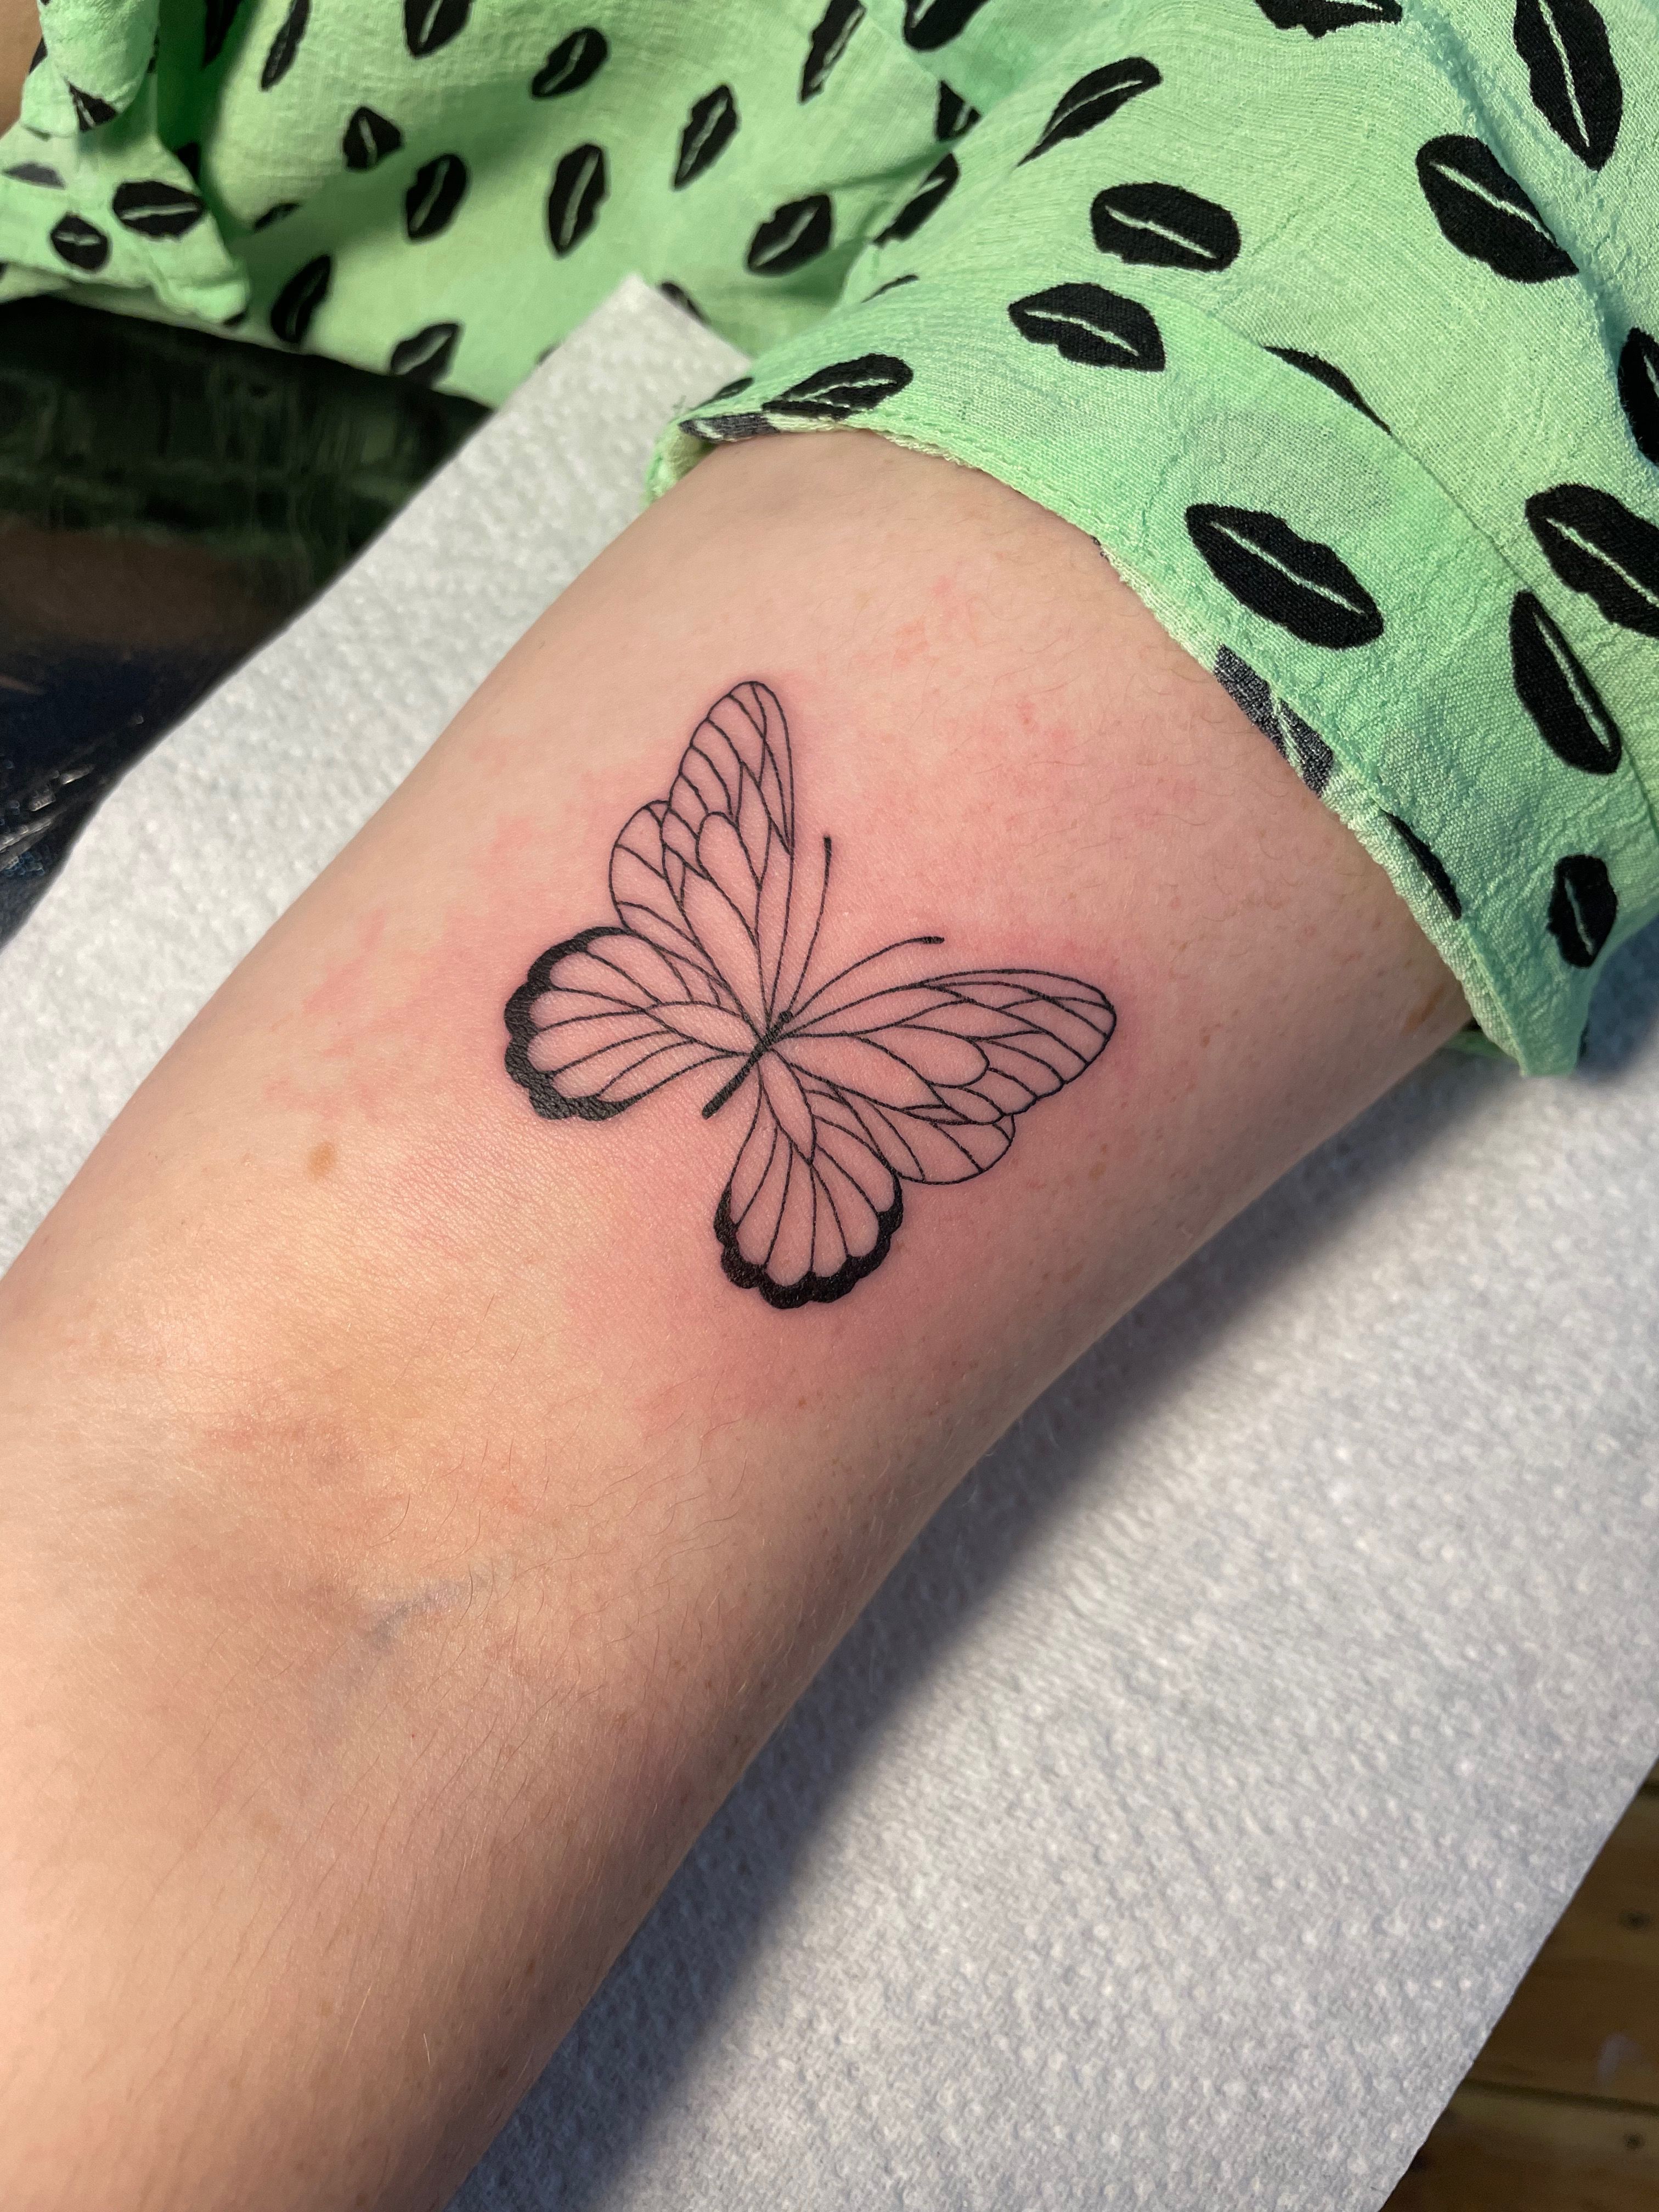 Butterfly Tattoo Ideas, Symbolism, Meaning - Parade